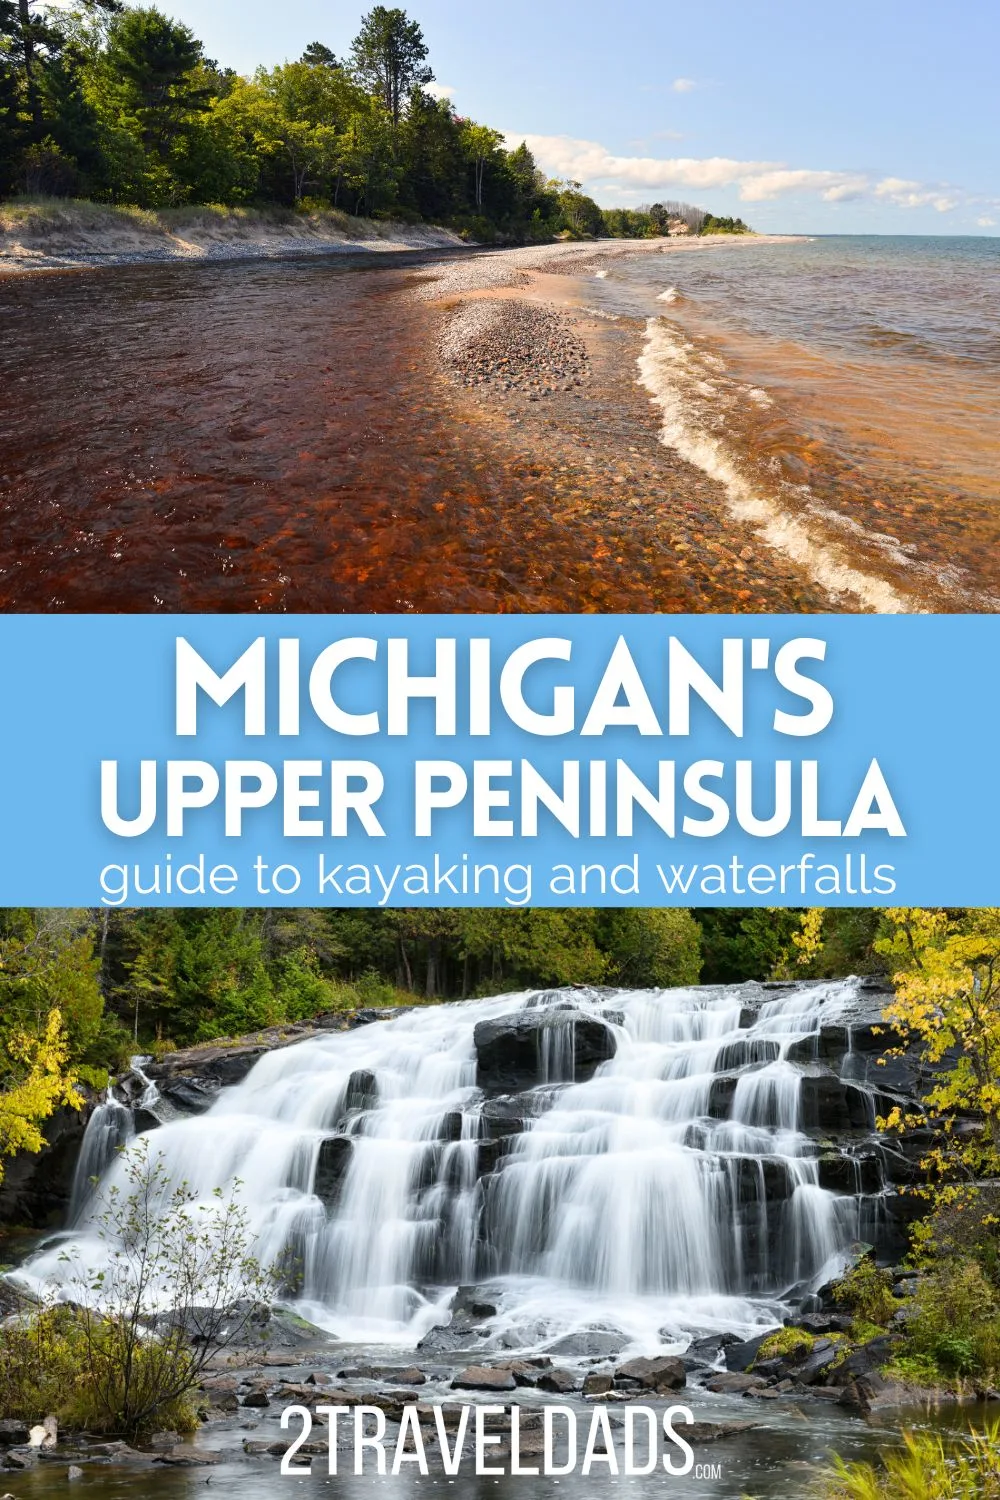 Kayaking on Michigan's Upper Peninsula (the UP) is a beautiful thing to do on a summer trip. From quiet bays on the Great Lakes to beautiful rivers, see what awesome kayaking spots you'll find on the Upper Peninsula of Michigan.